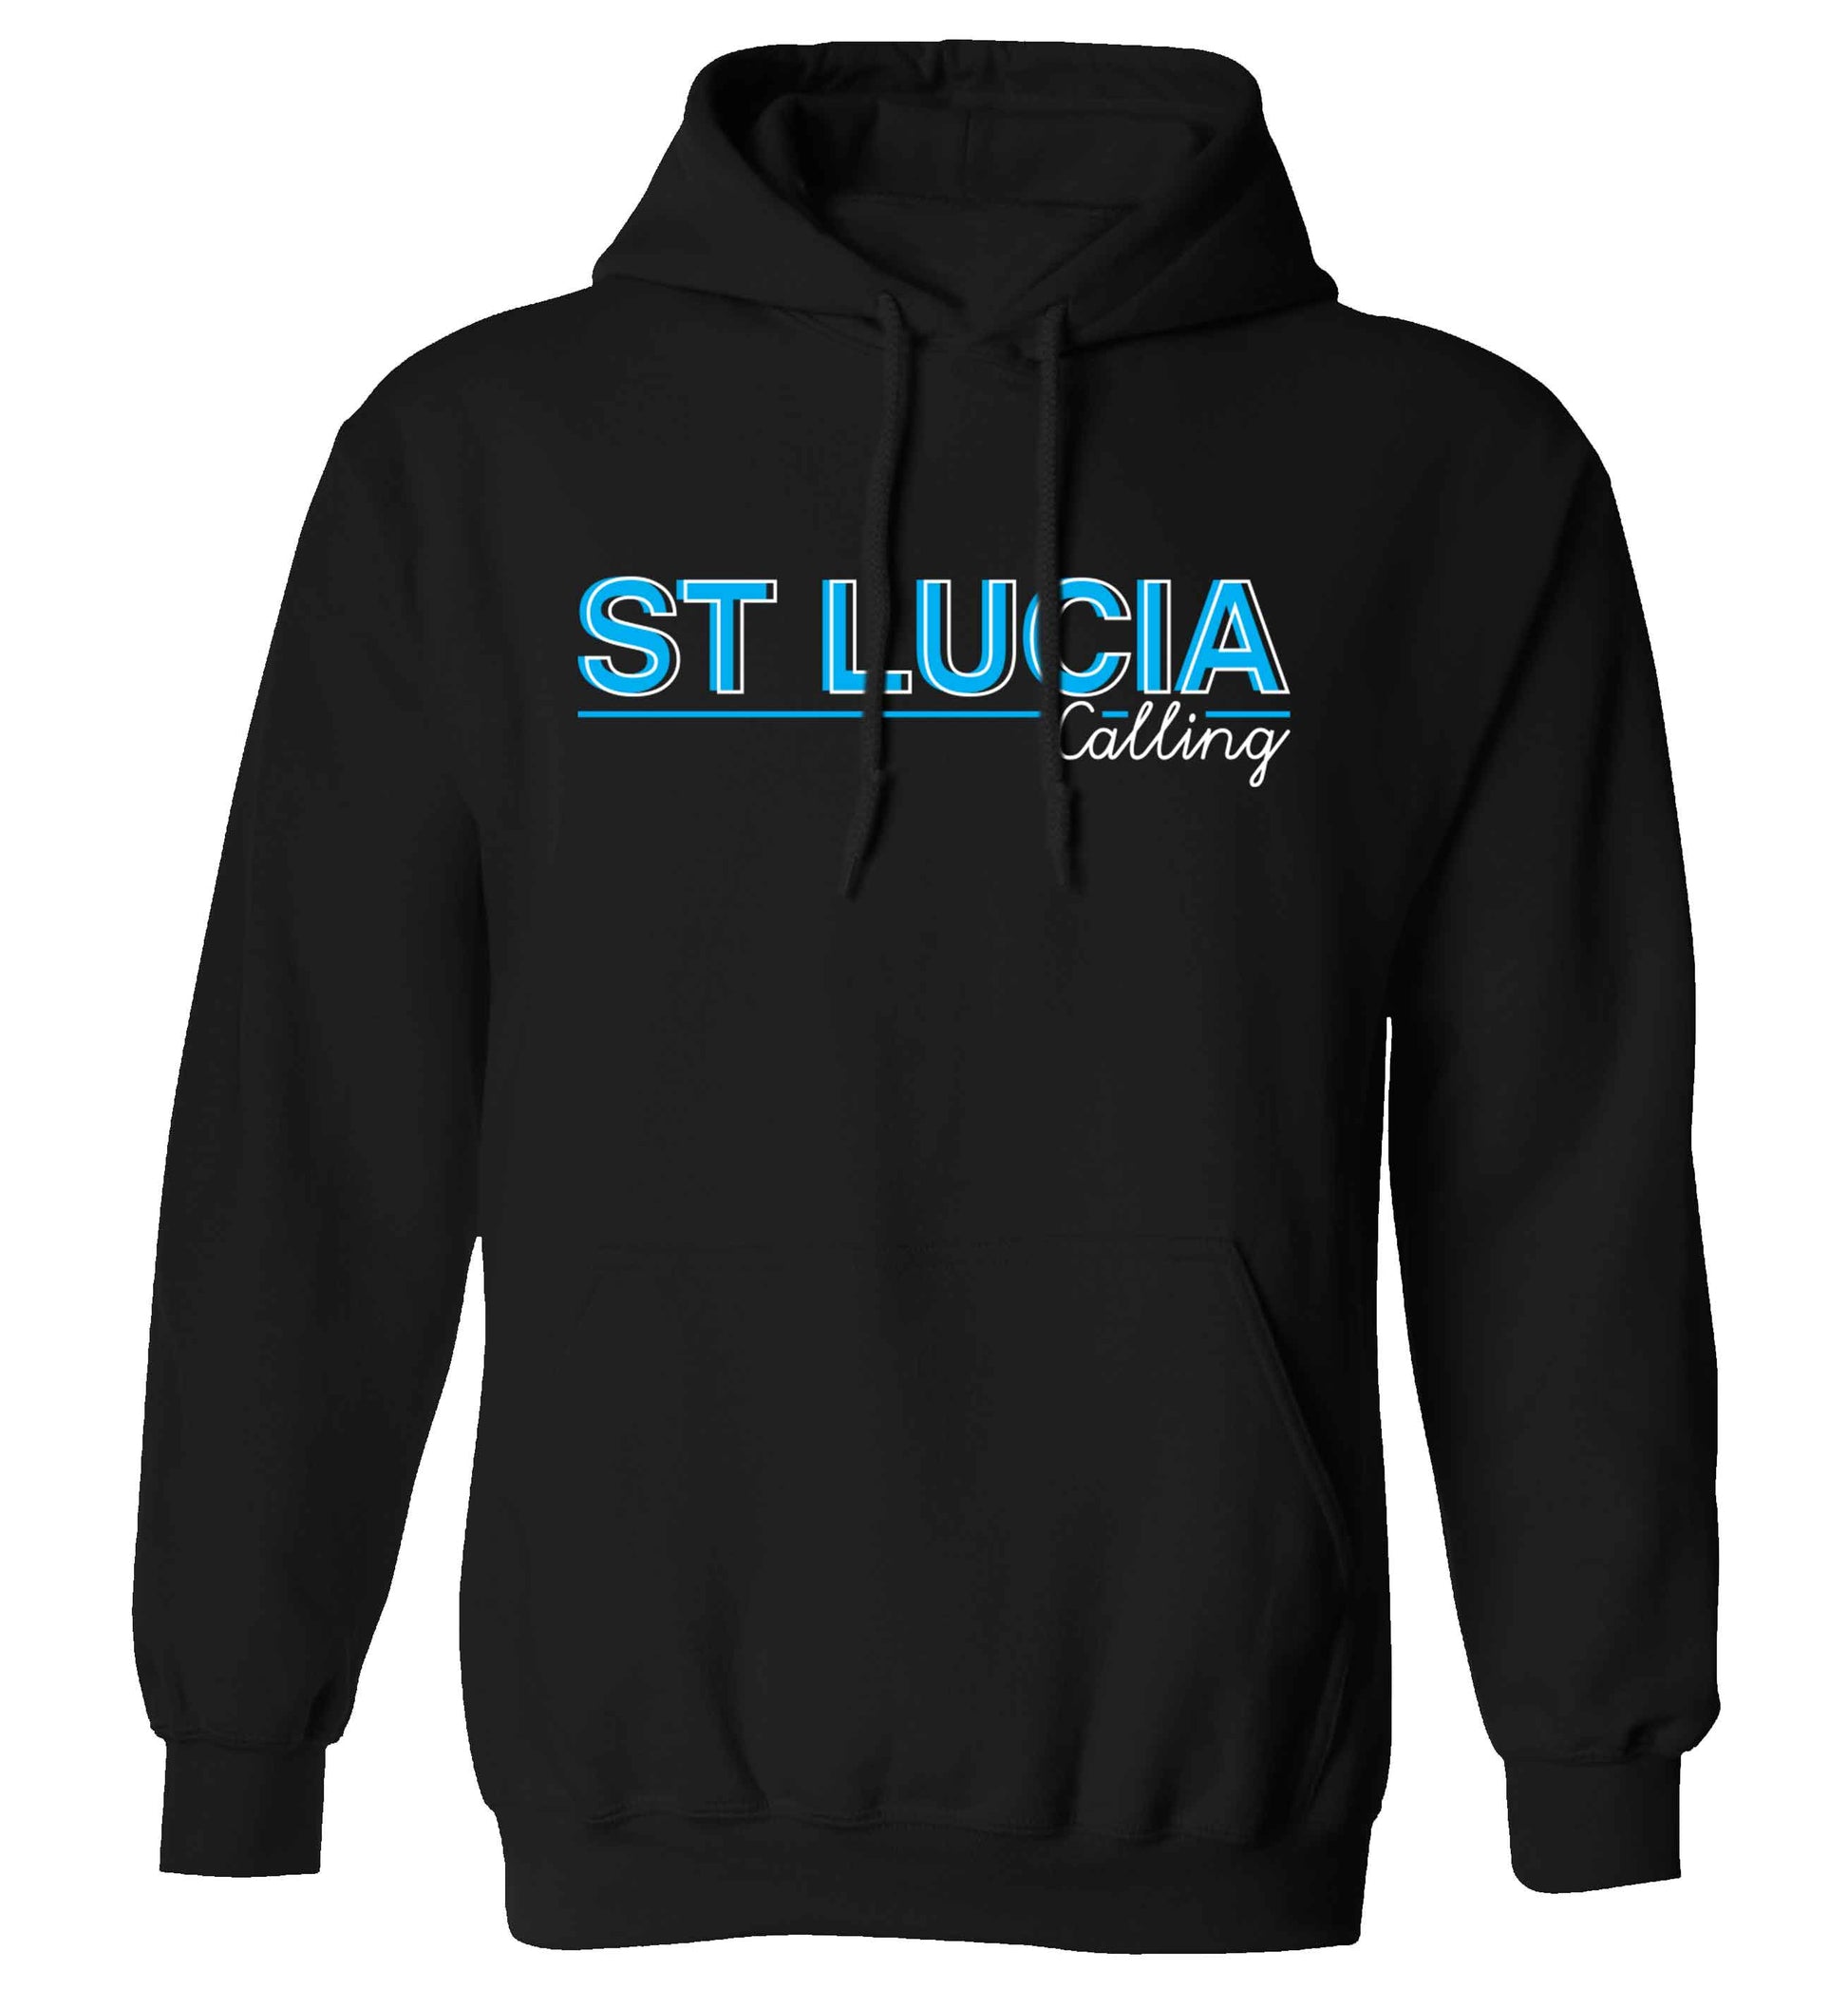 St Lucia calling adults unisex black hoodie 2XL